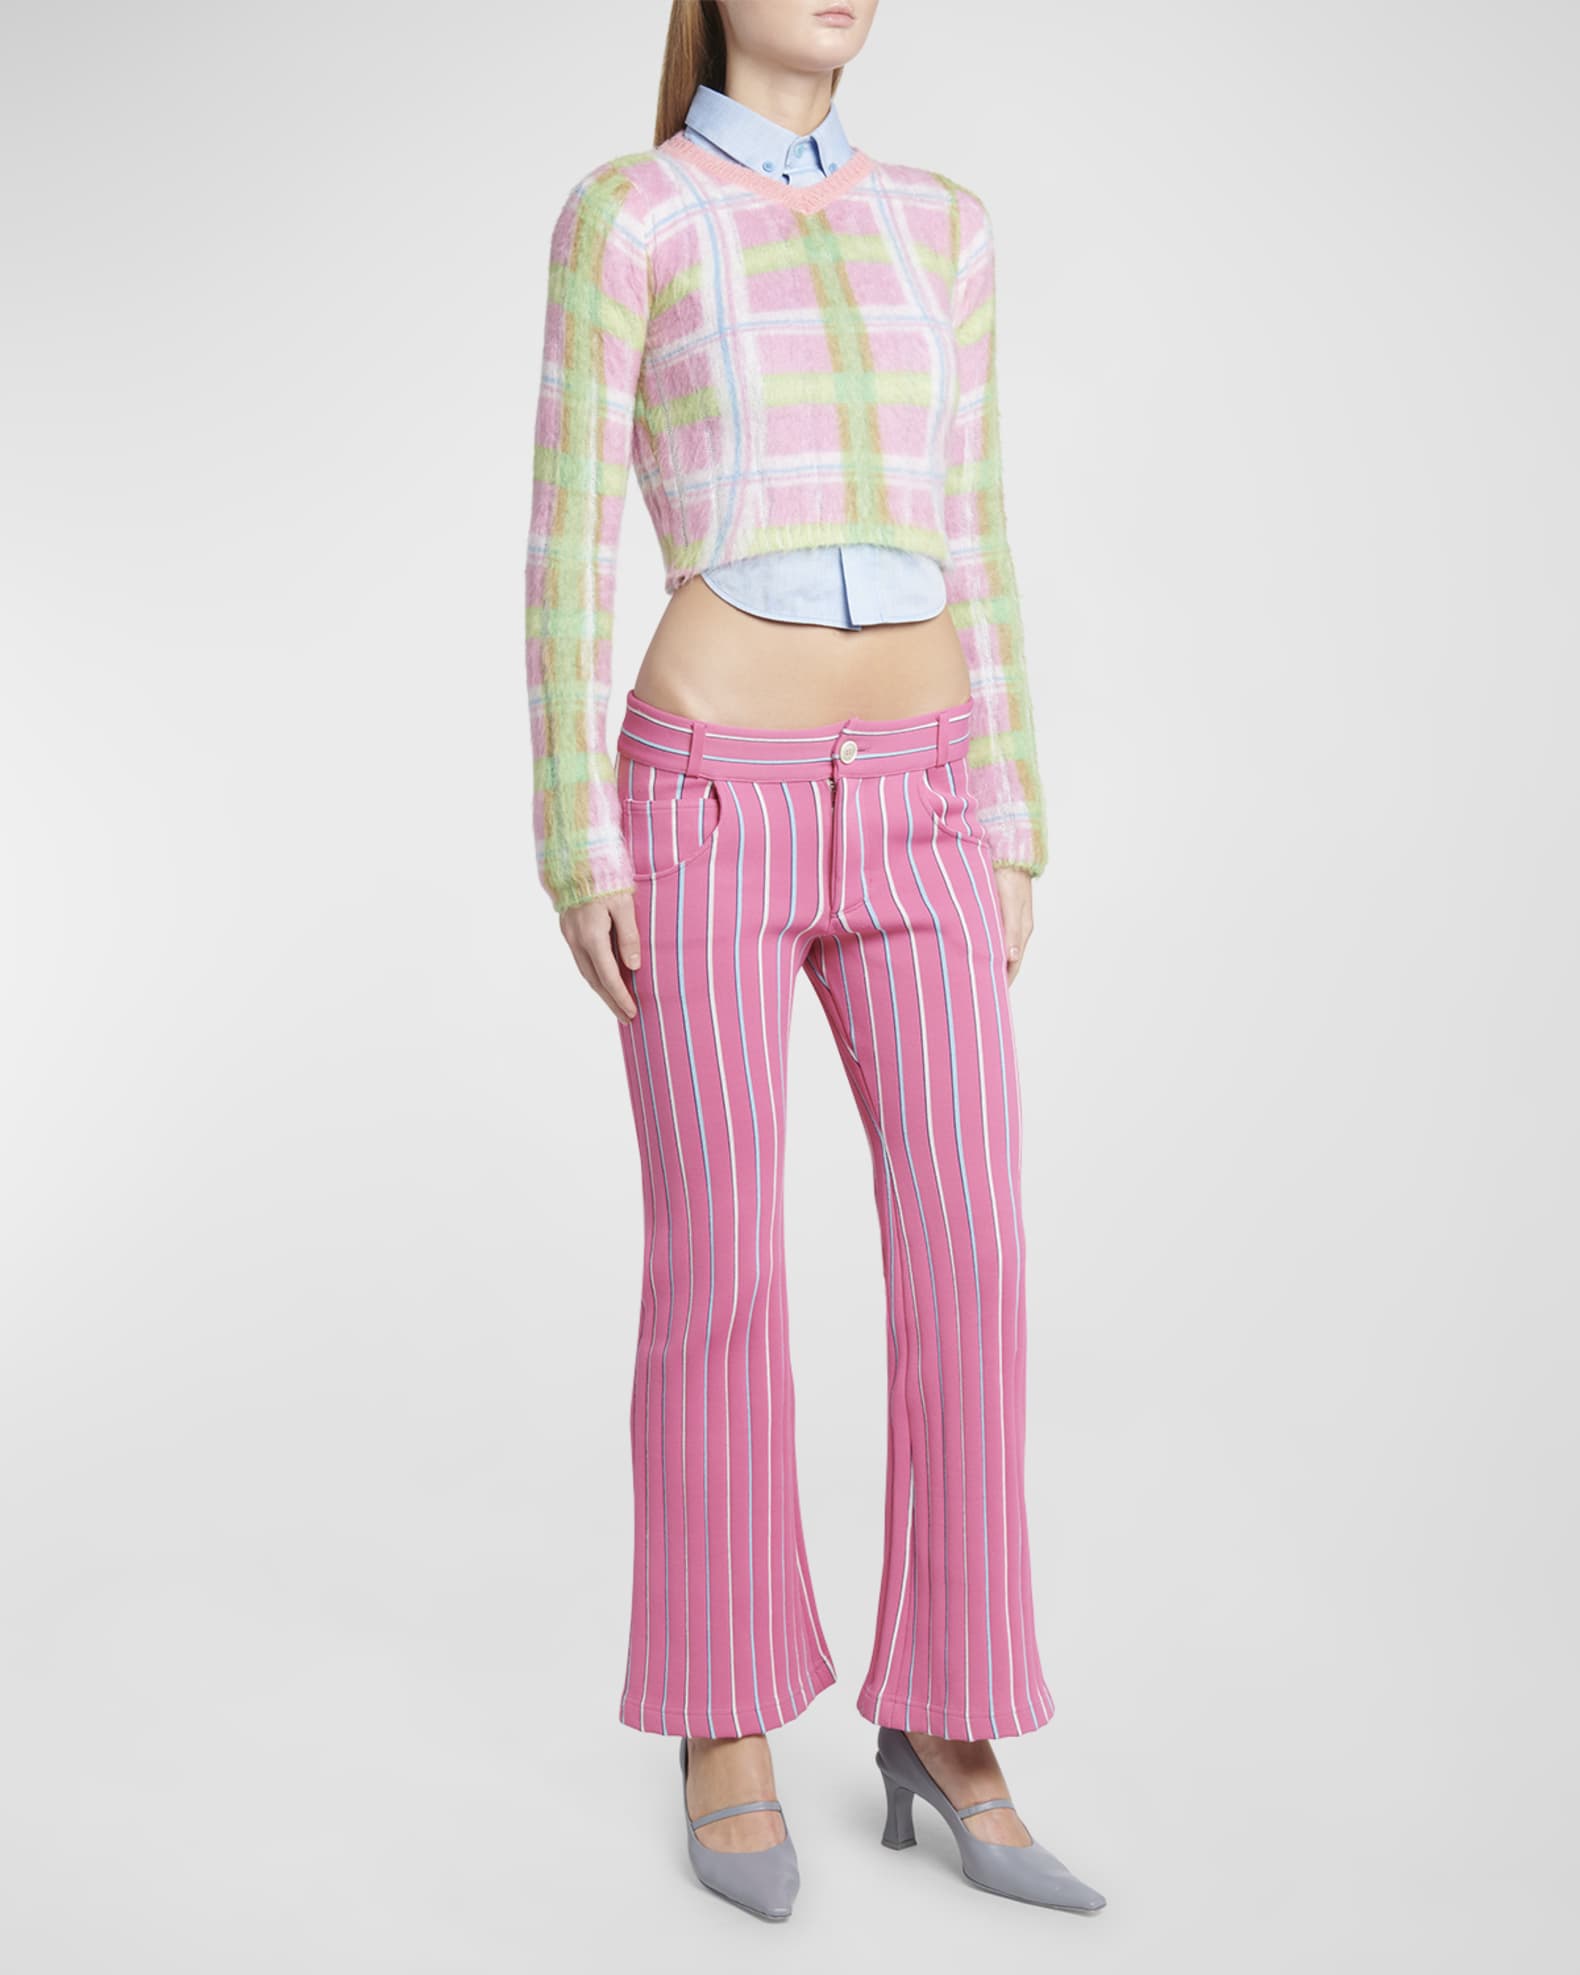 Marni Red amp; Black Striped Trousers